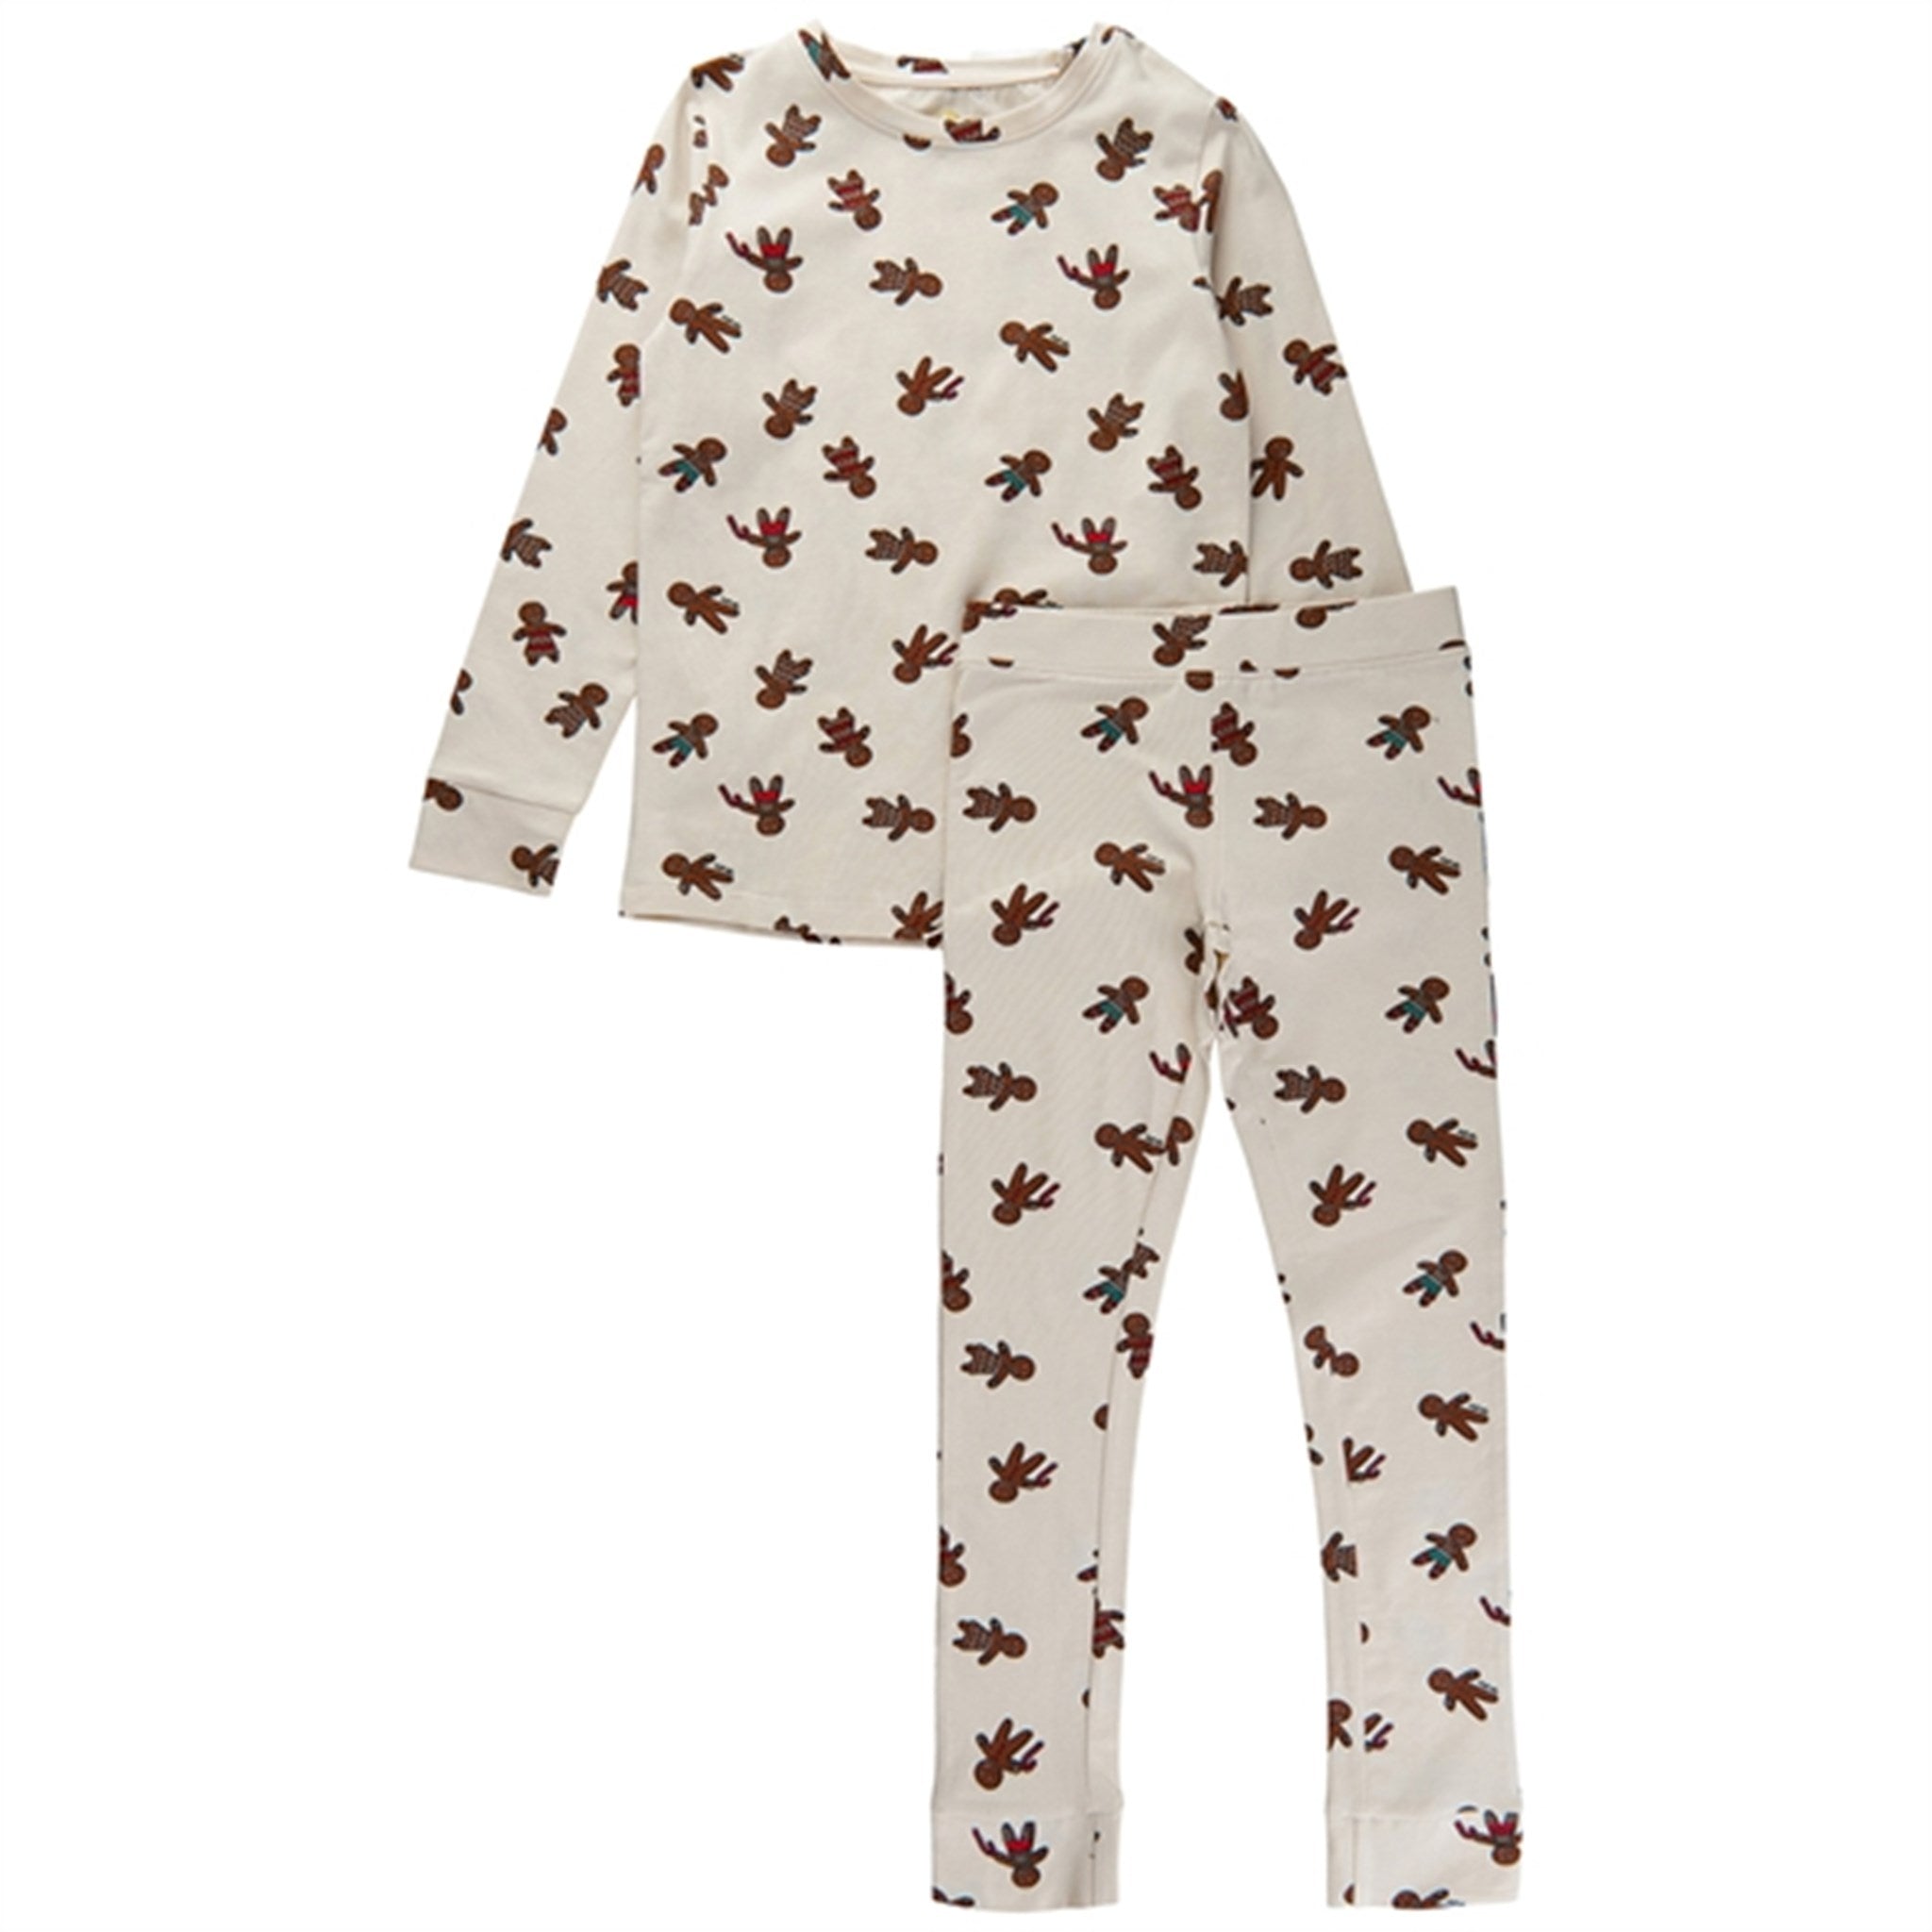 The New White Swan Ginger Aop Holiday Pyjamas